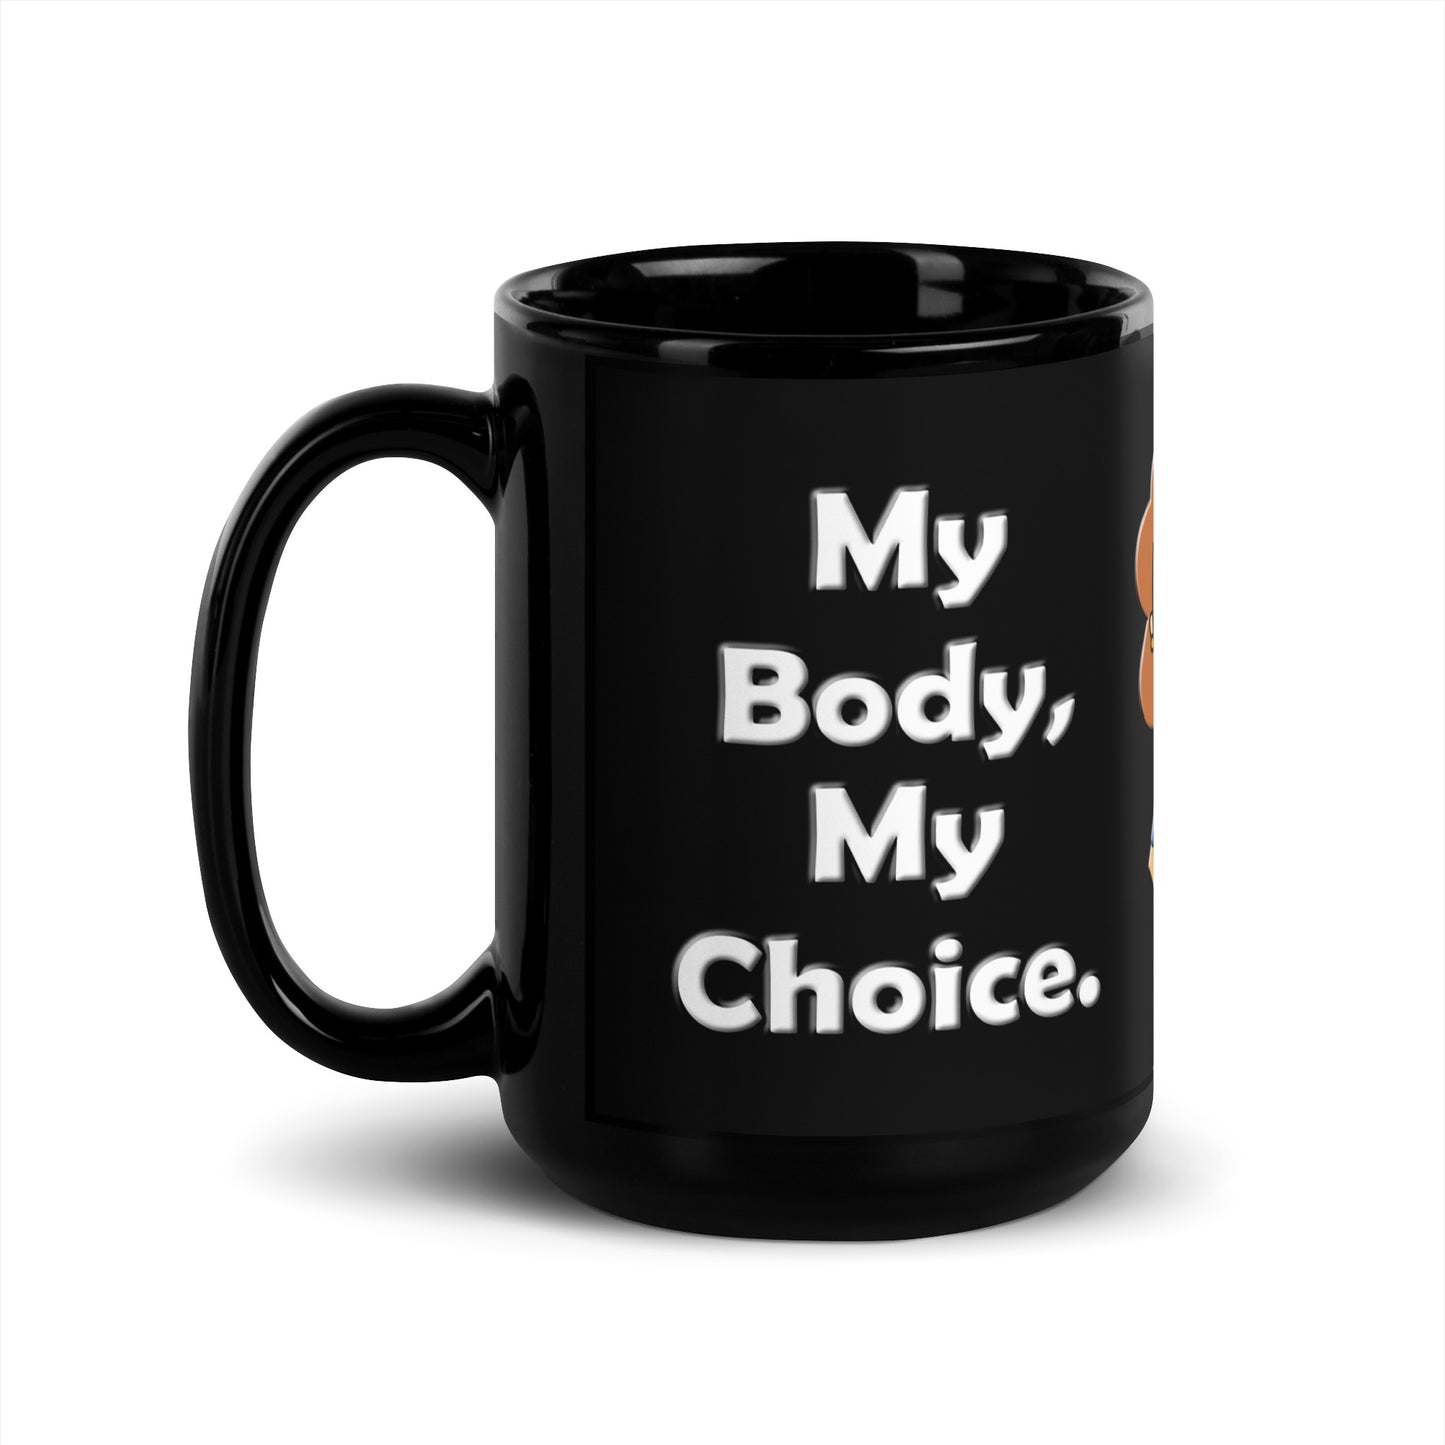 A015 Mug - Black Glossy Ceramic Mug Featuring a Graphic of a Young Pregnant Woman Smoking, with the Text “My Body, My Choice – Anyone Got a Problem with That?”